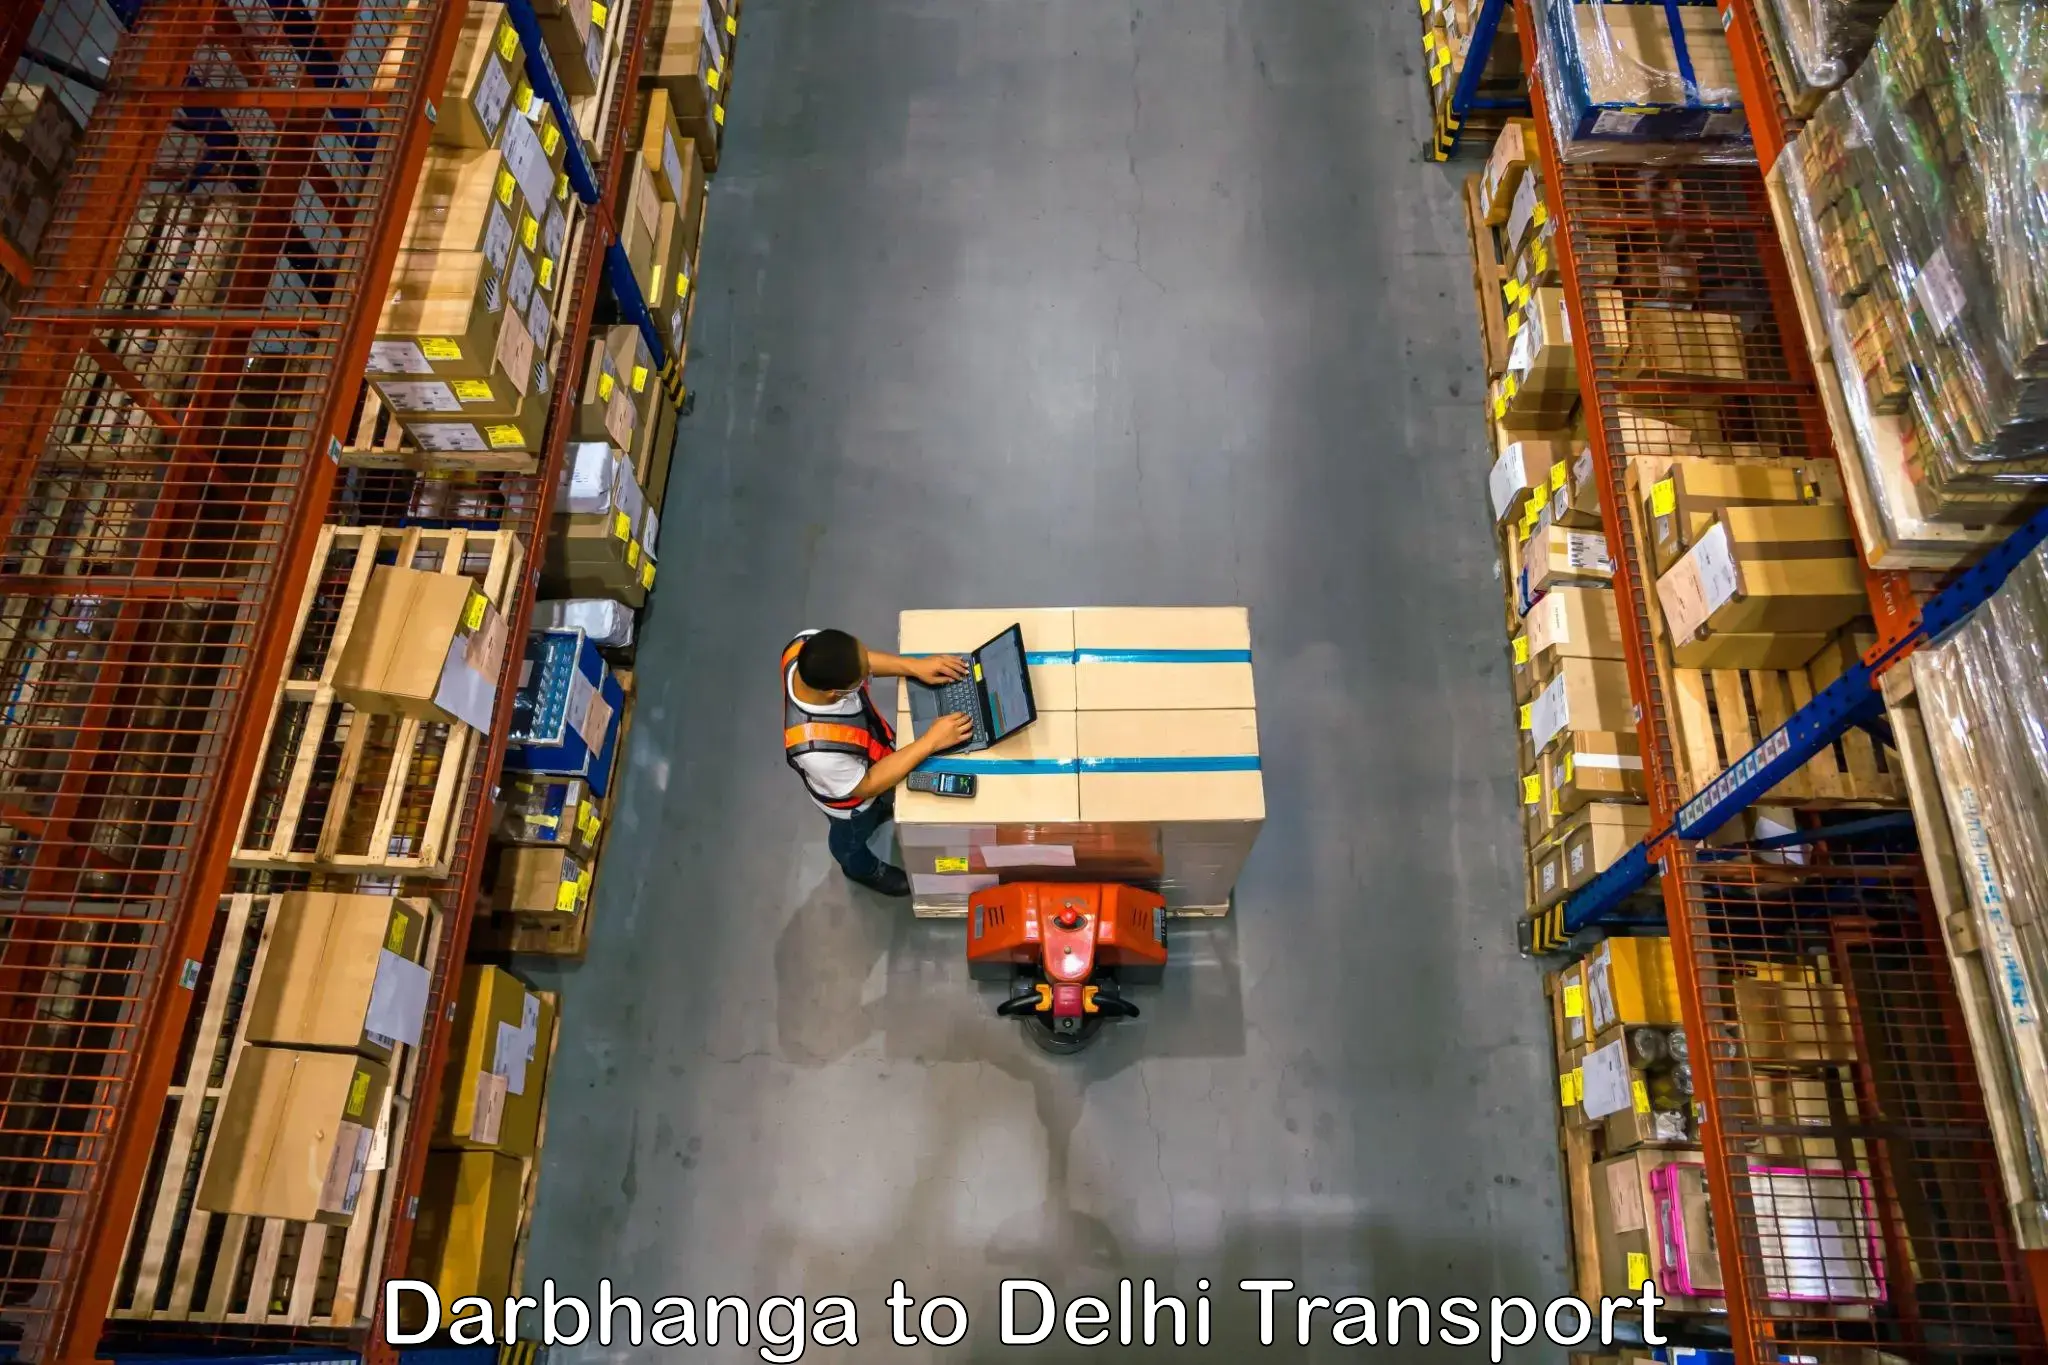 Goods delivery service Darbhanga to NCR